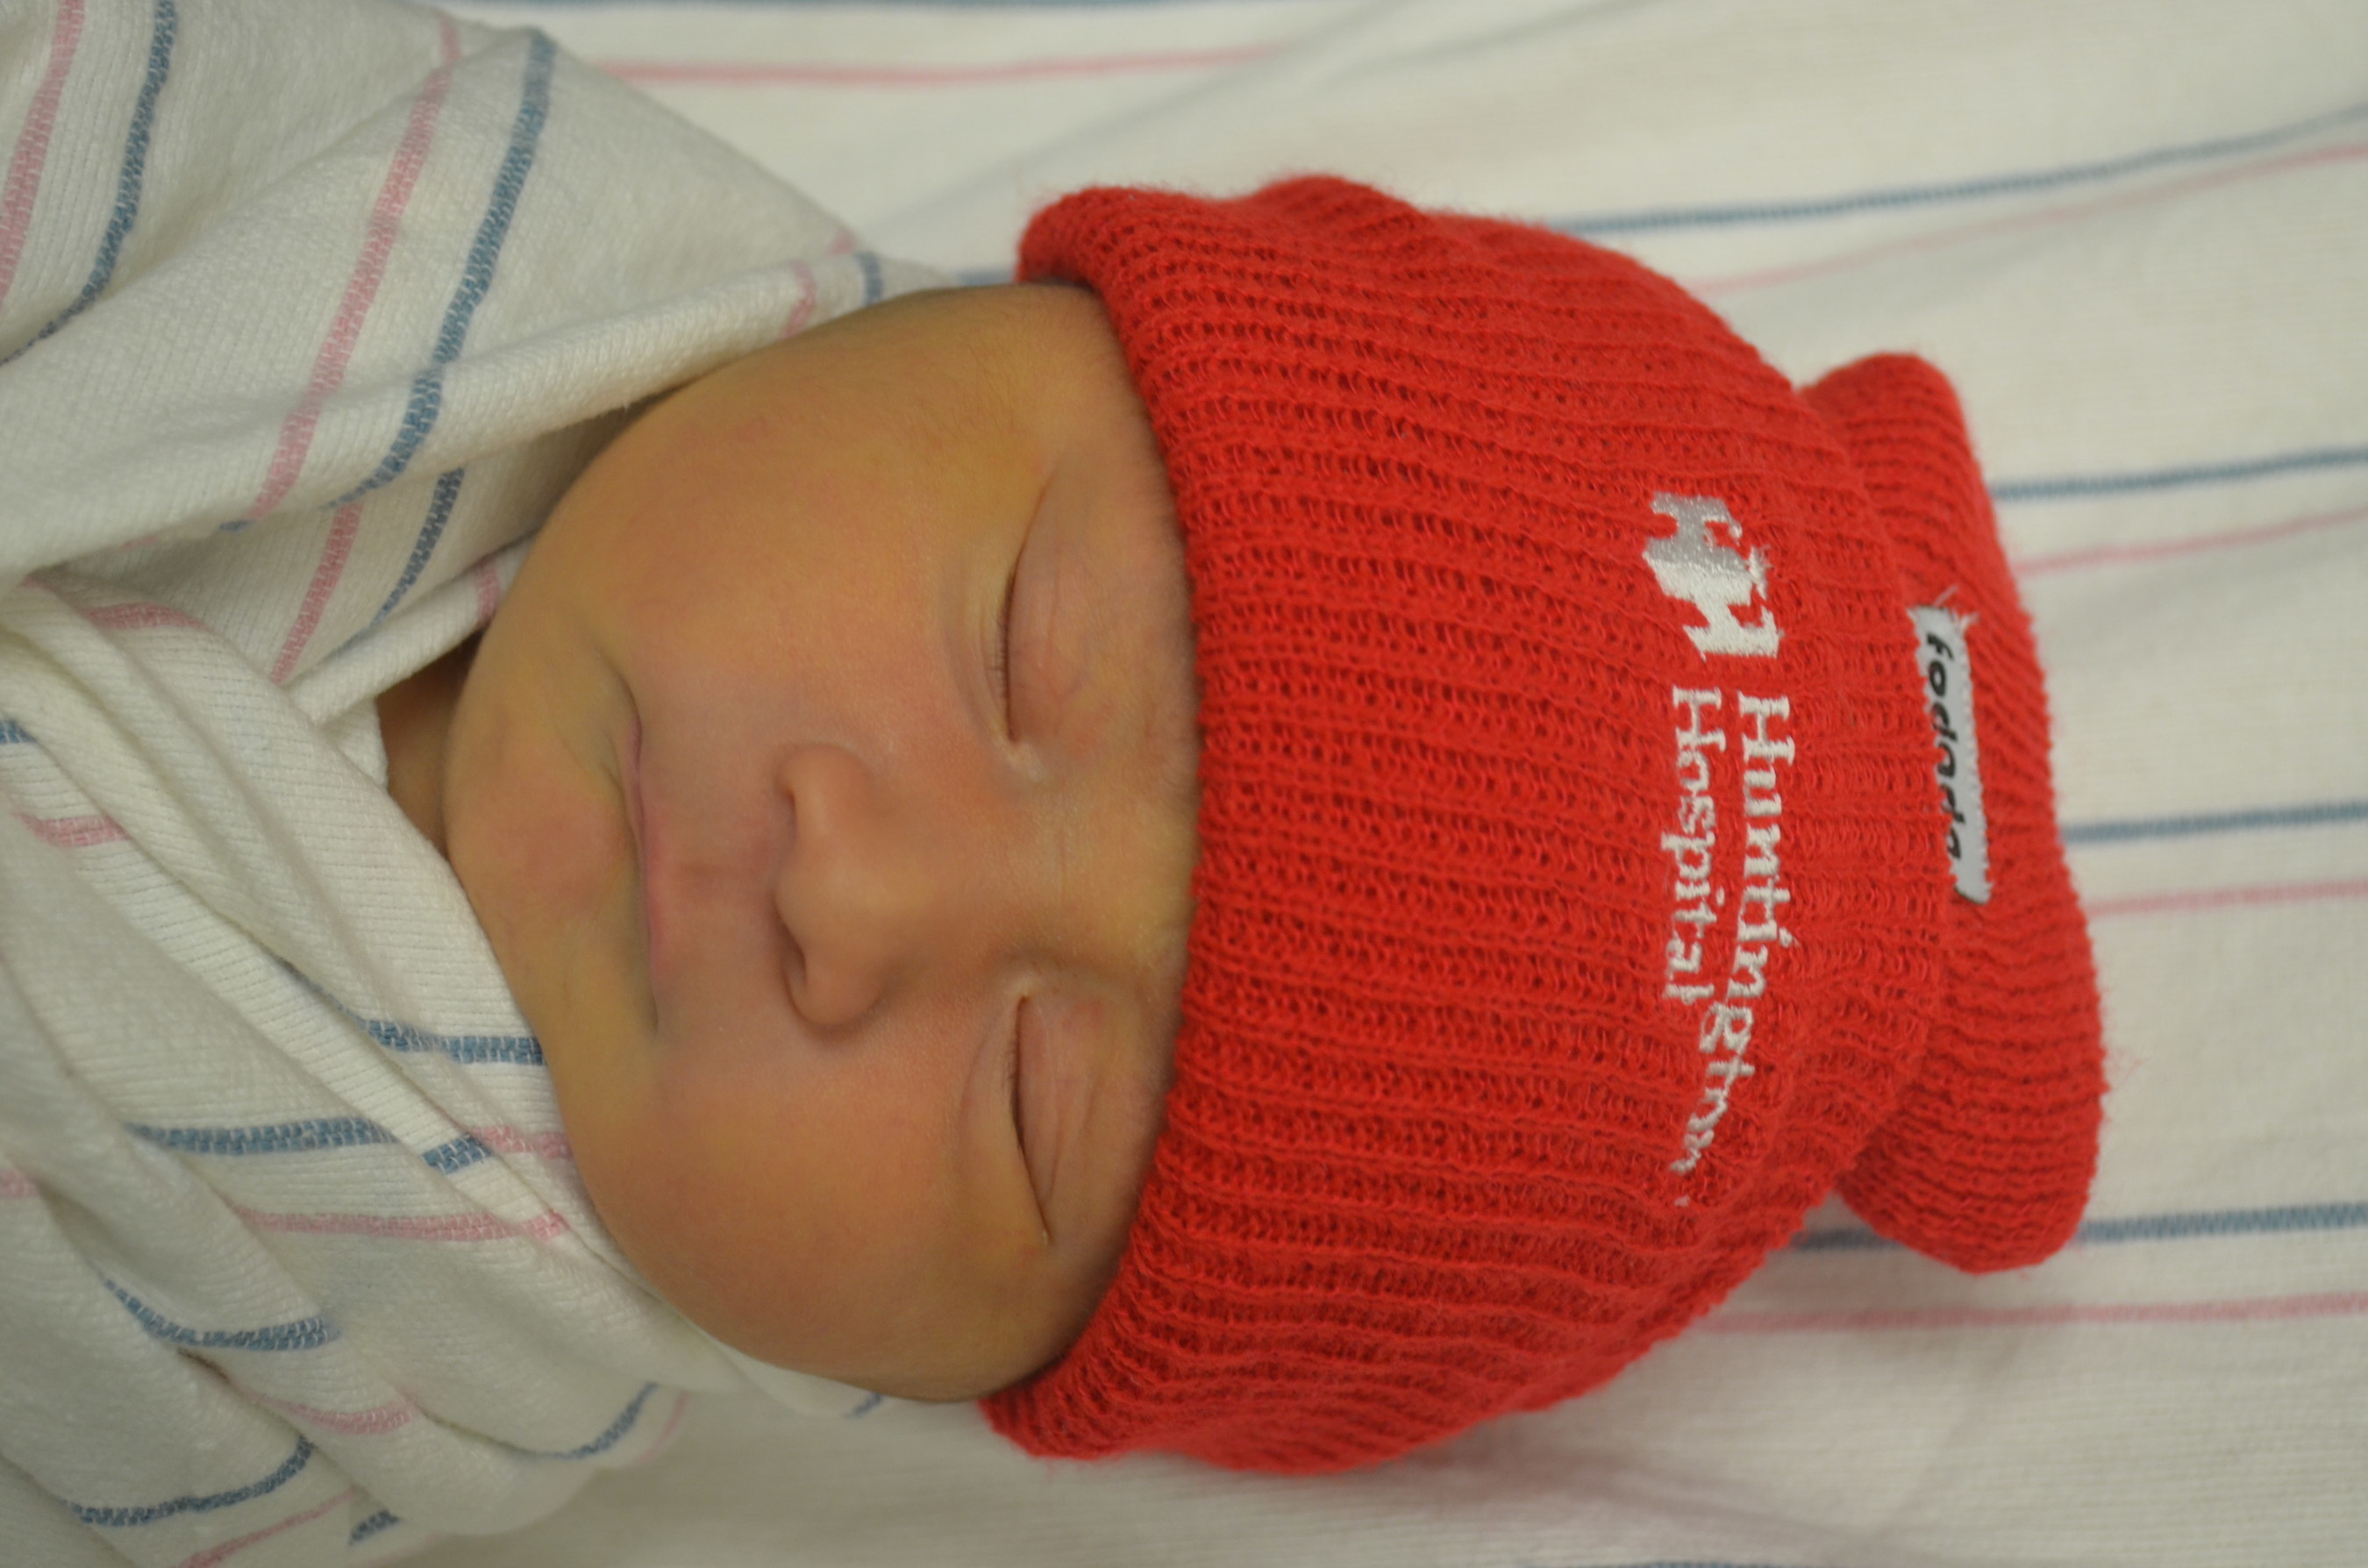 At Huntington Hospital, all babies born during February receive red beanies, bringing awareness to heart disease in women.